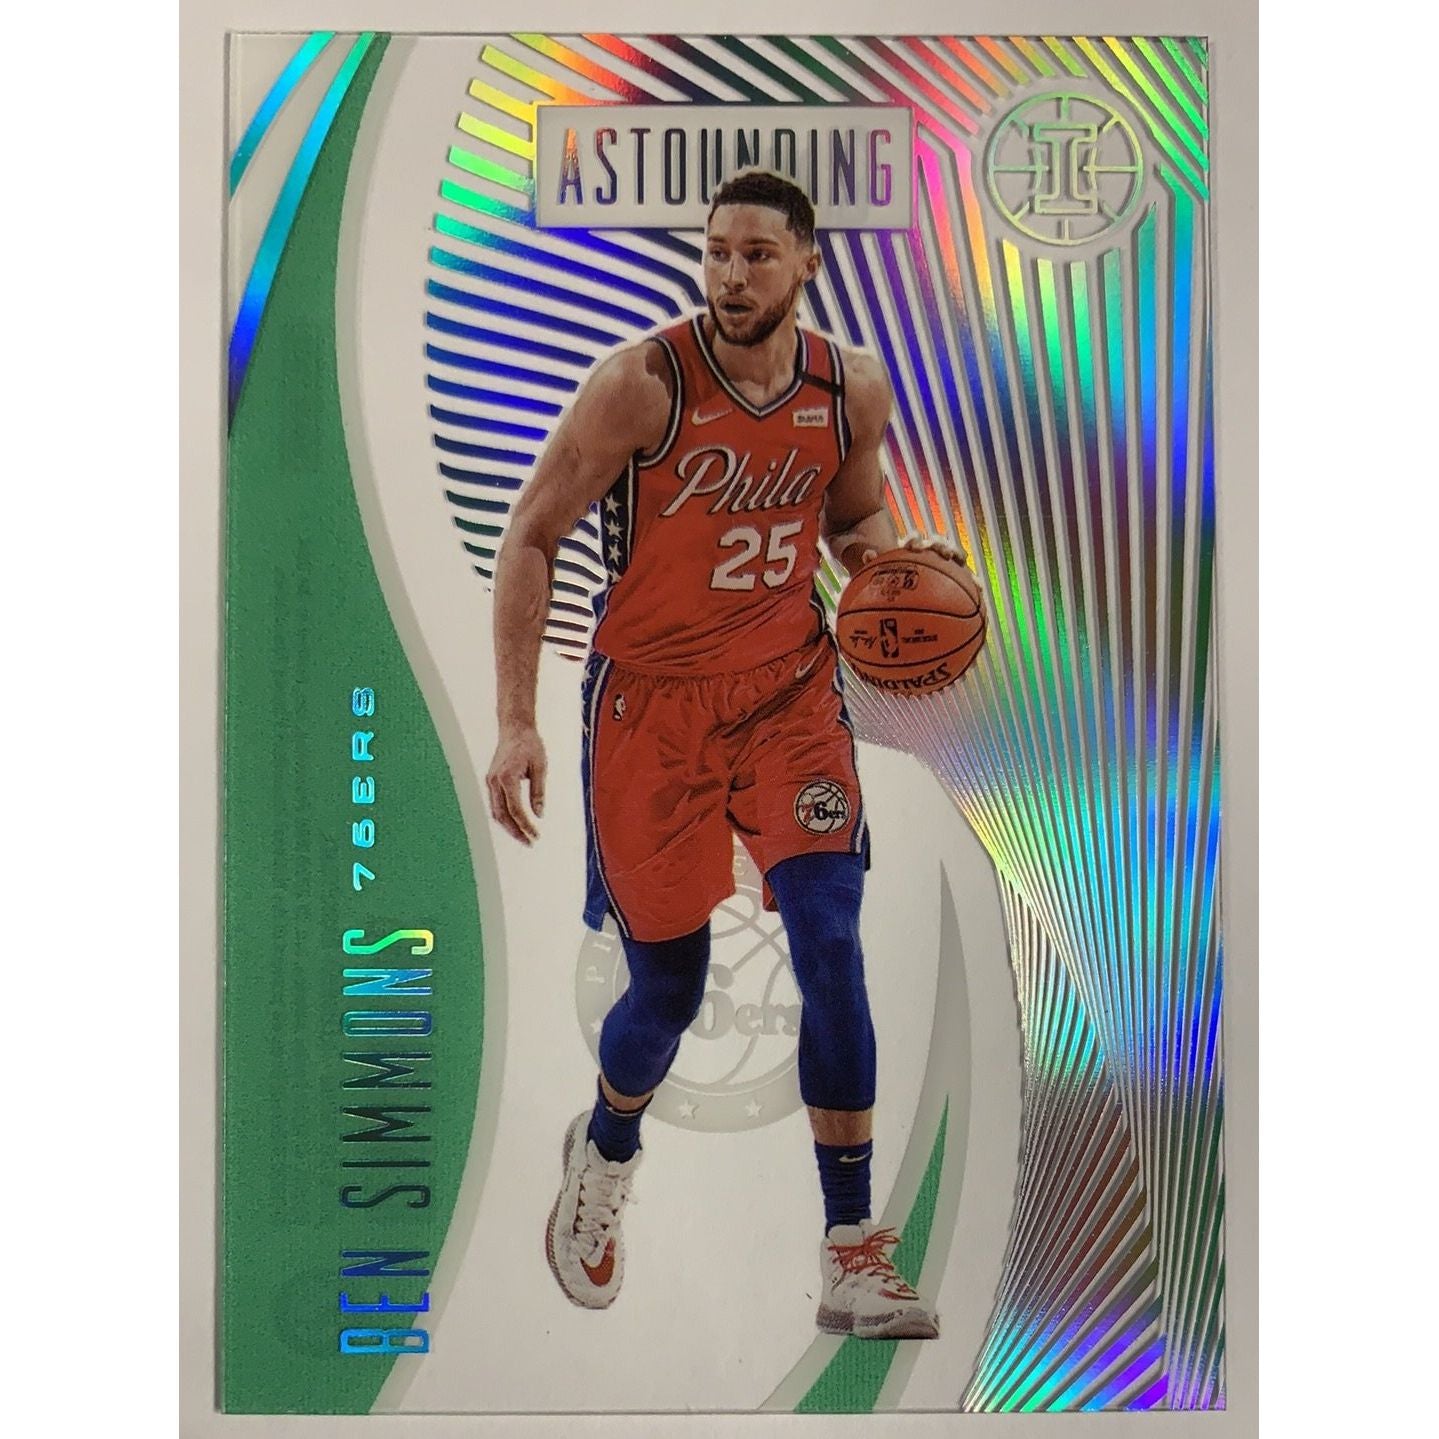  2019-20 Illusions Astounding Ben Simmons Emerald Acetate  Local Legends Cards & Collectibles